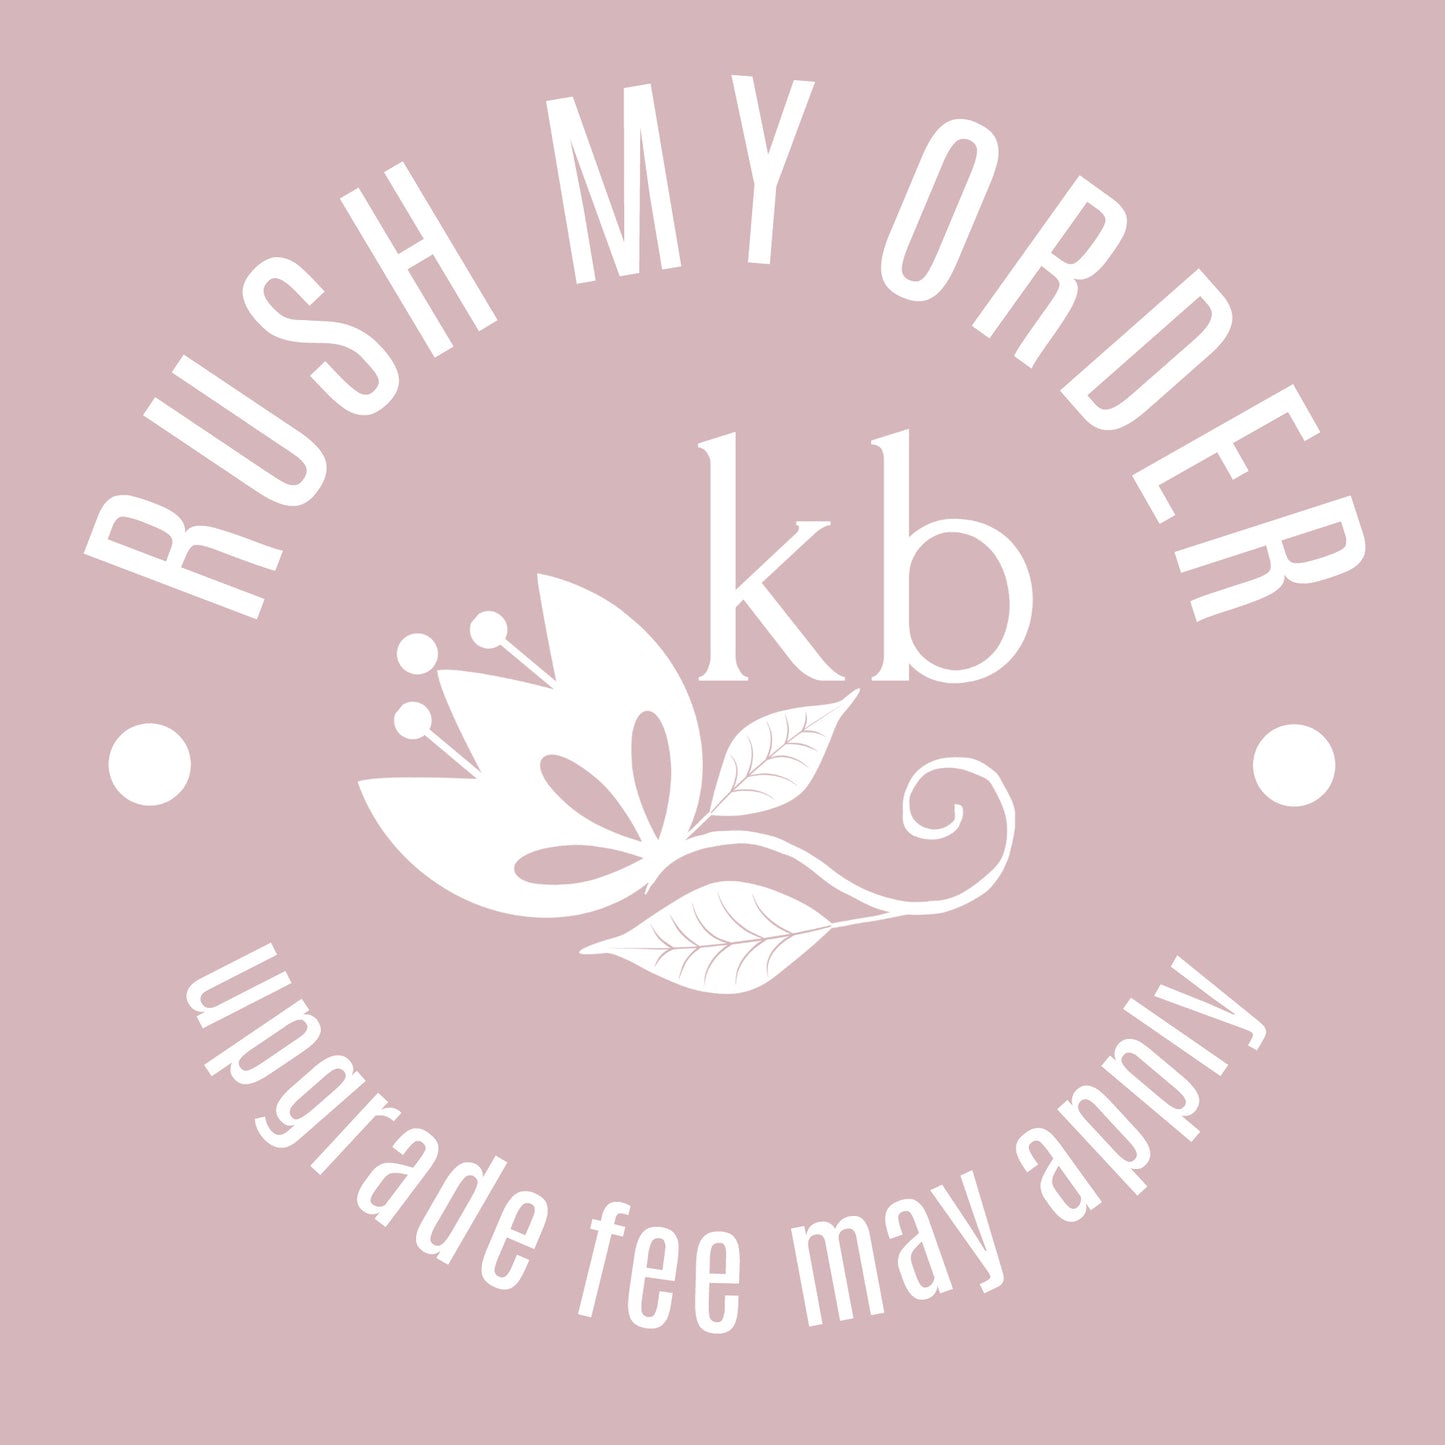 Rush order upgrade - for items not in "Quick to despatch" collection